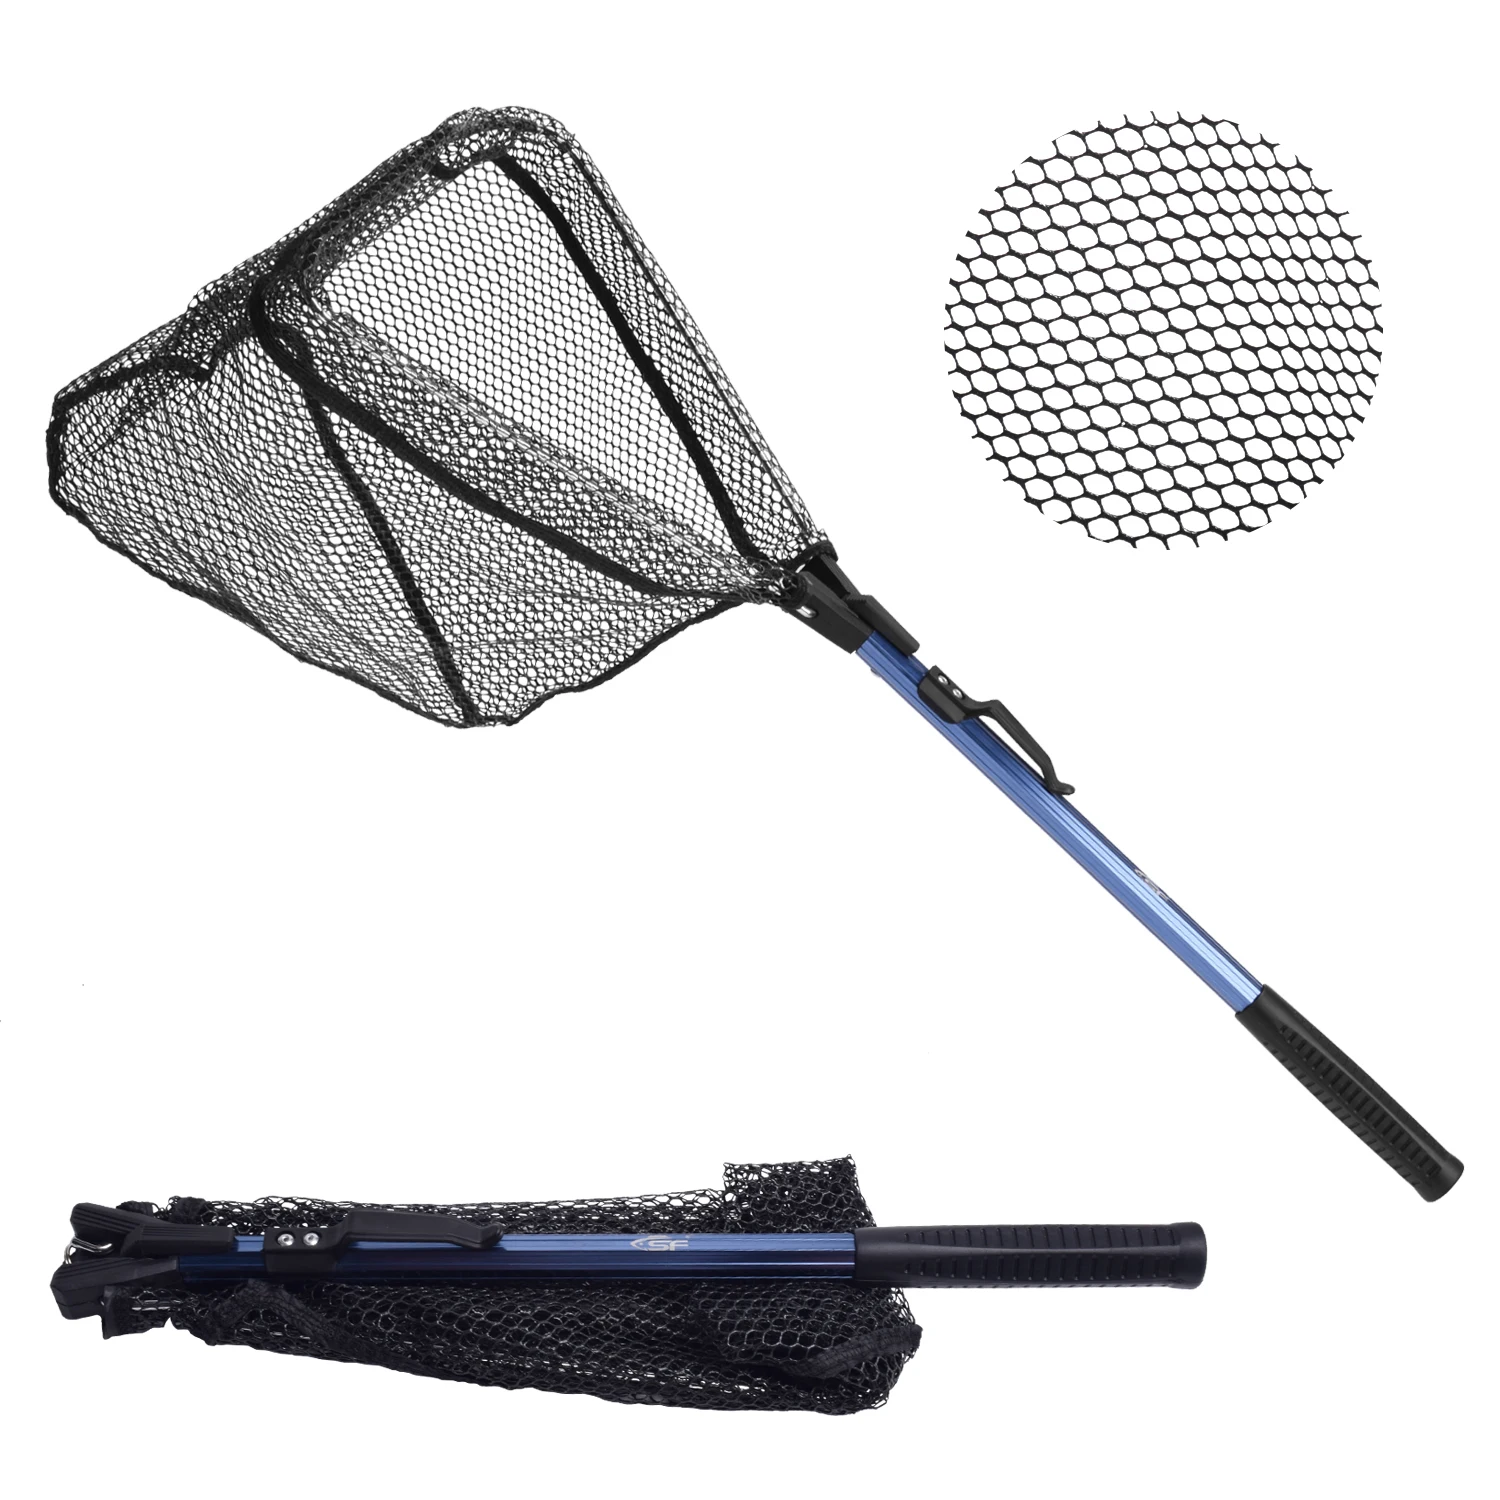 SF Foldable Fishing Landing Net with Collapsible Telescopic Aluminum Pole Handle,Durable Mesh with Rubber Coating 